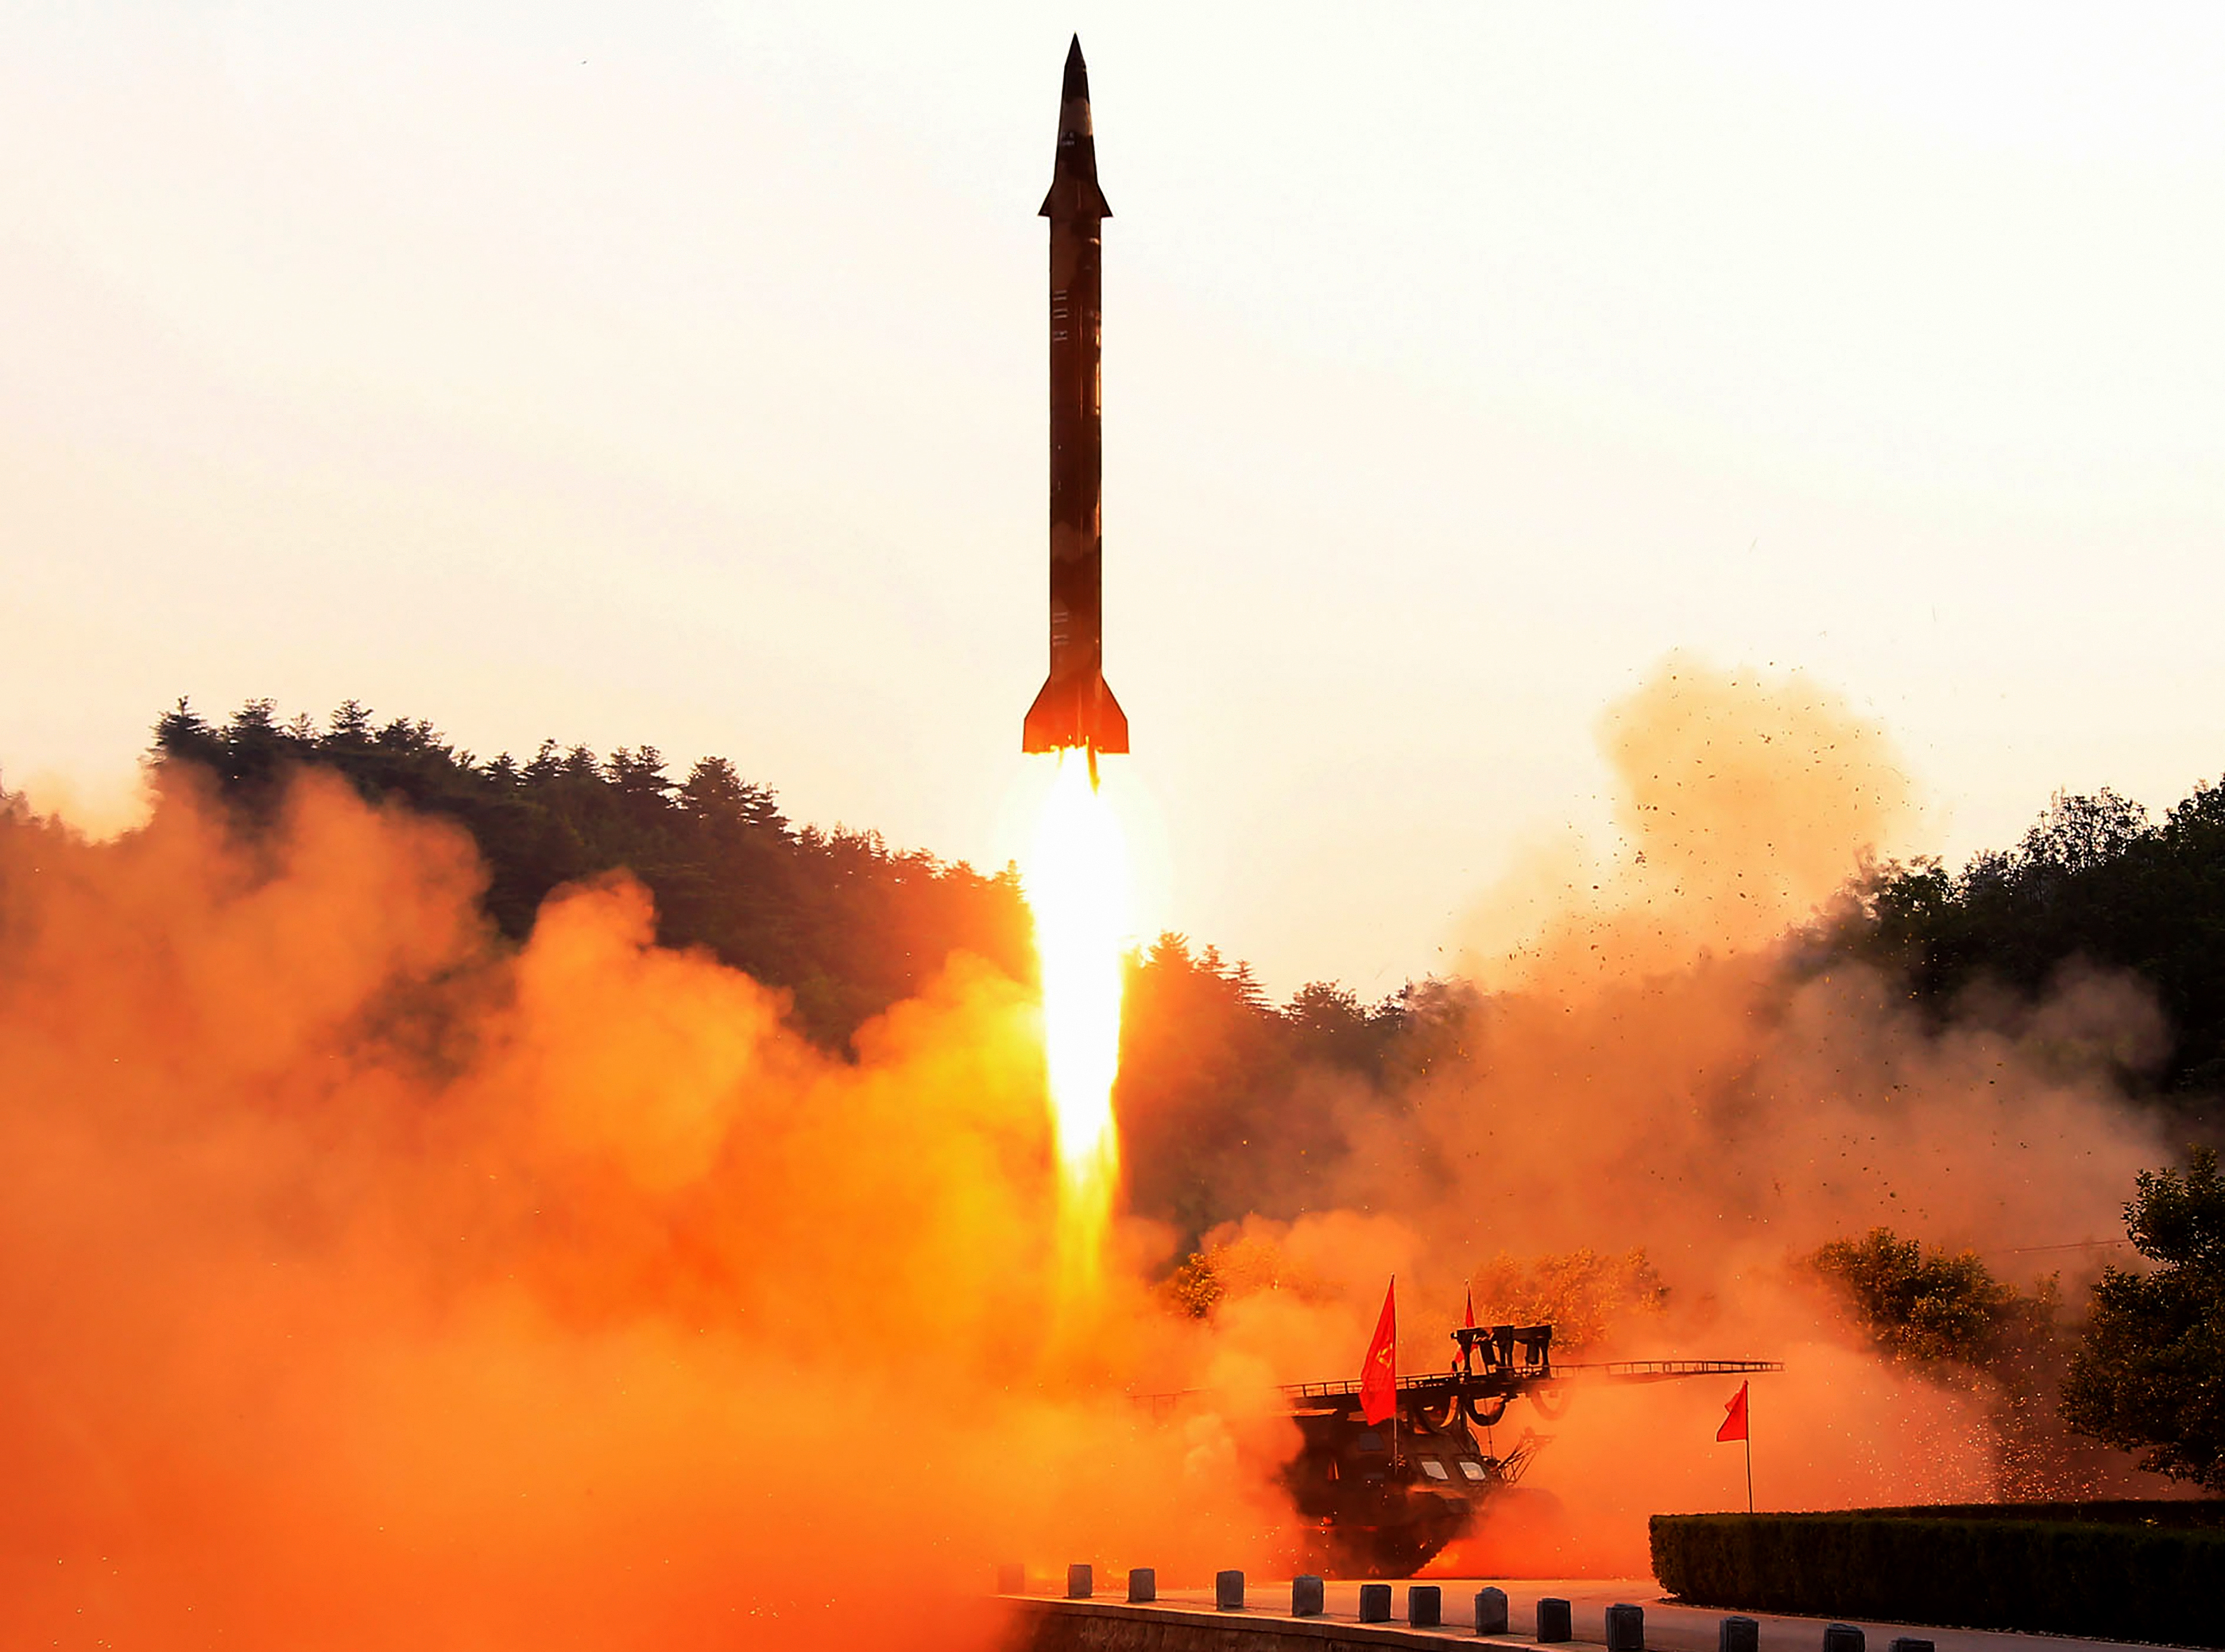 A ballistic missile is test-fired in North Korea